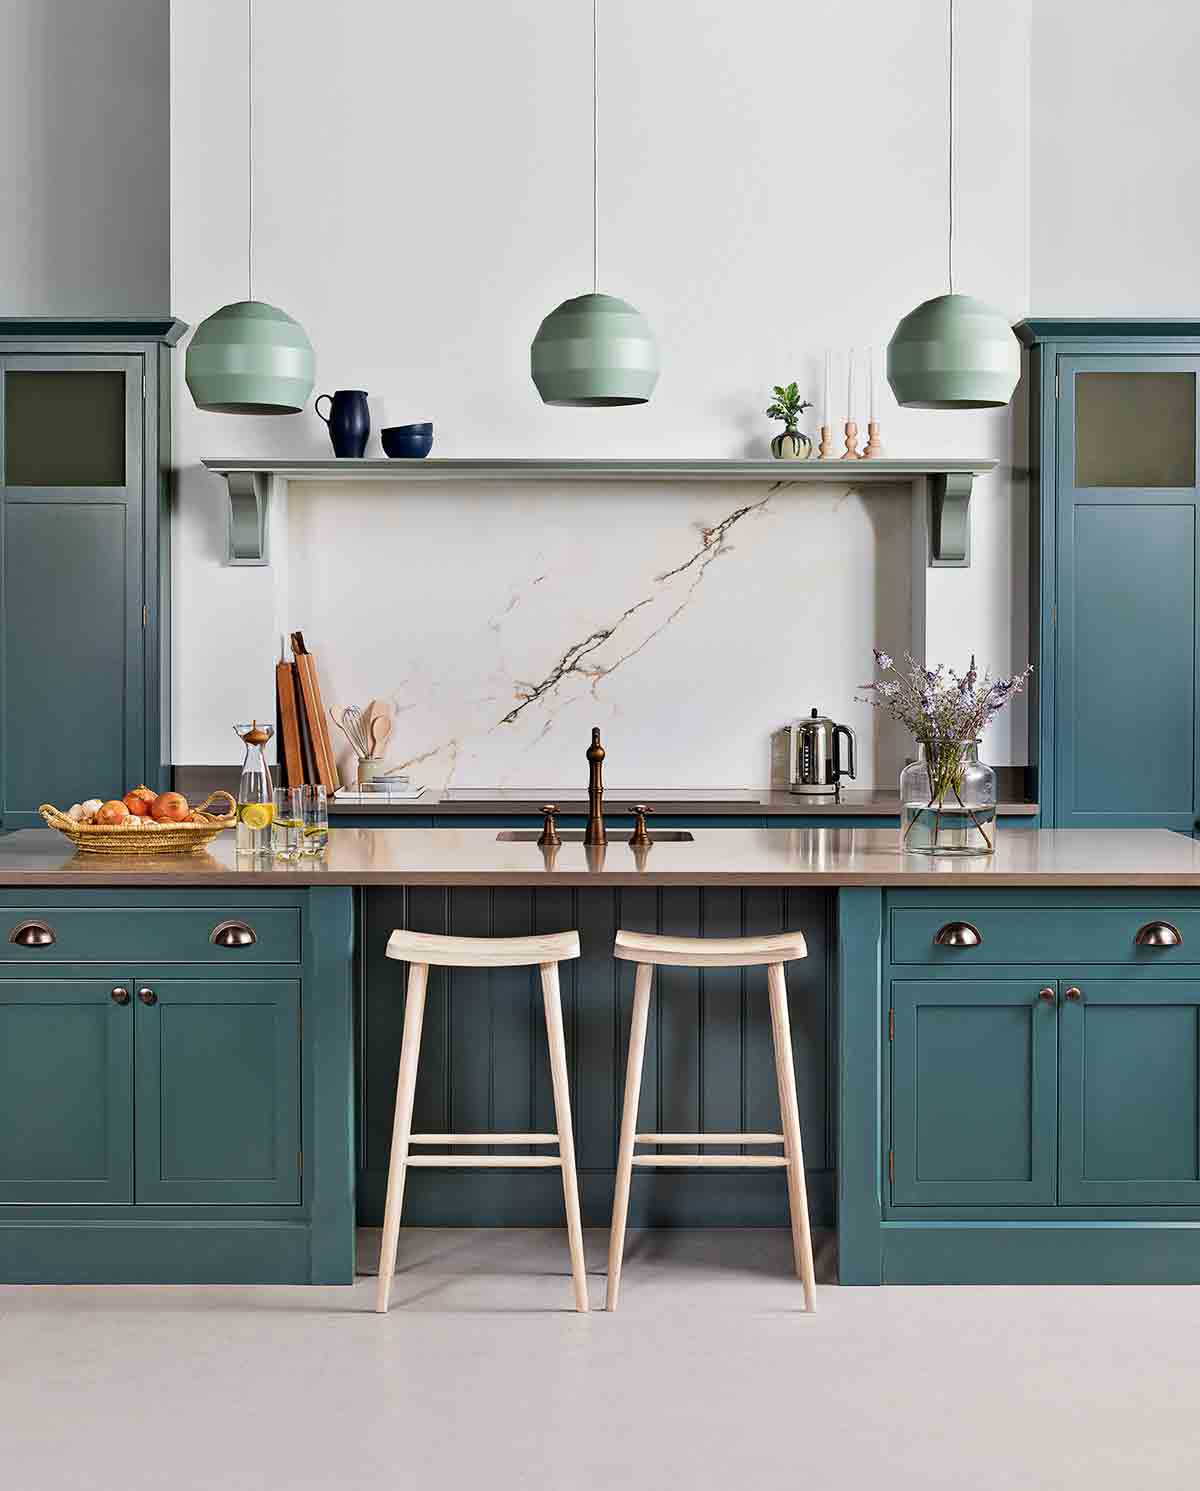 Kitchen Trend Forecast for 2019